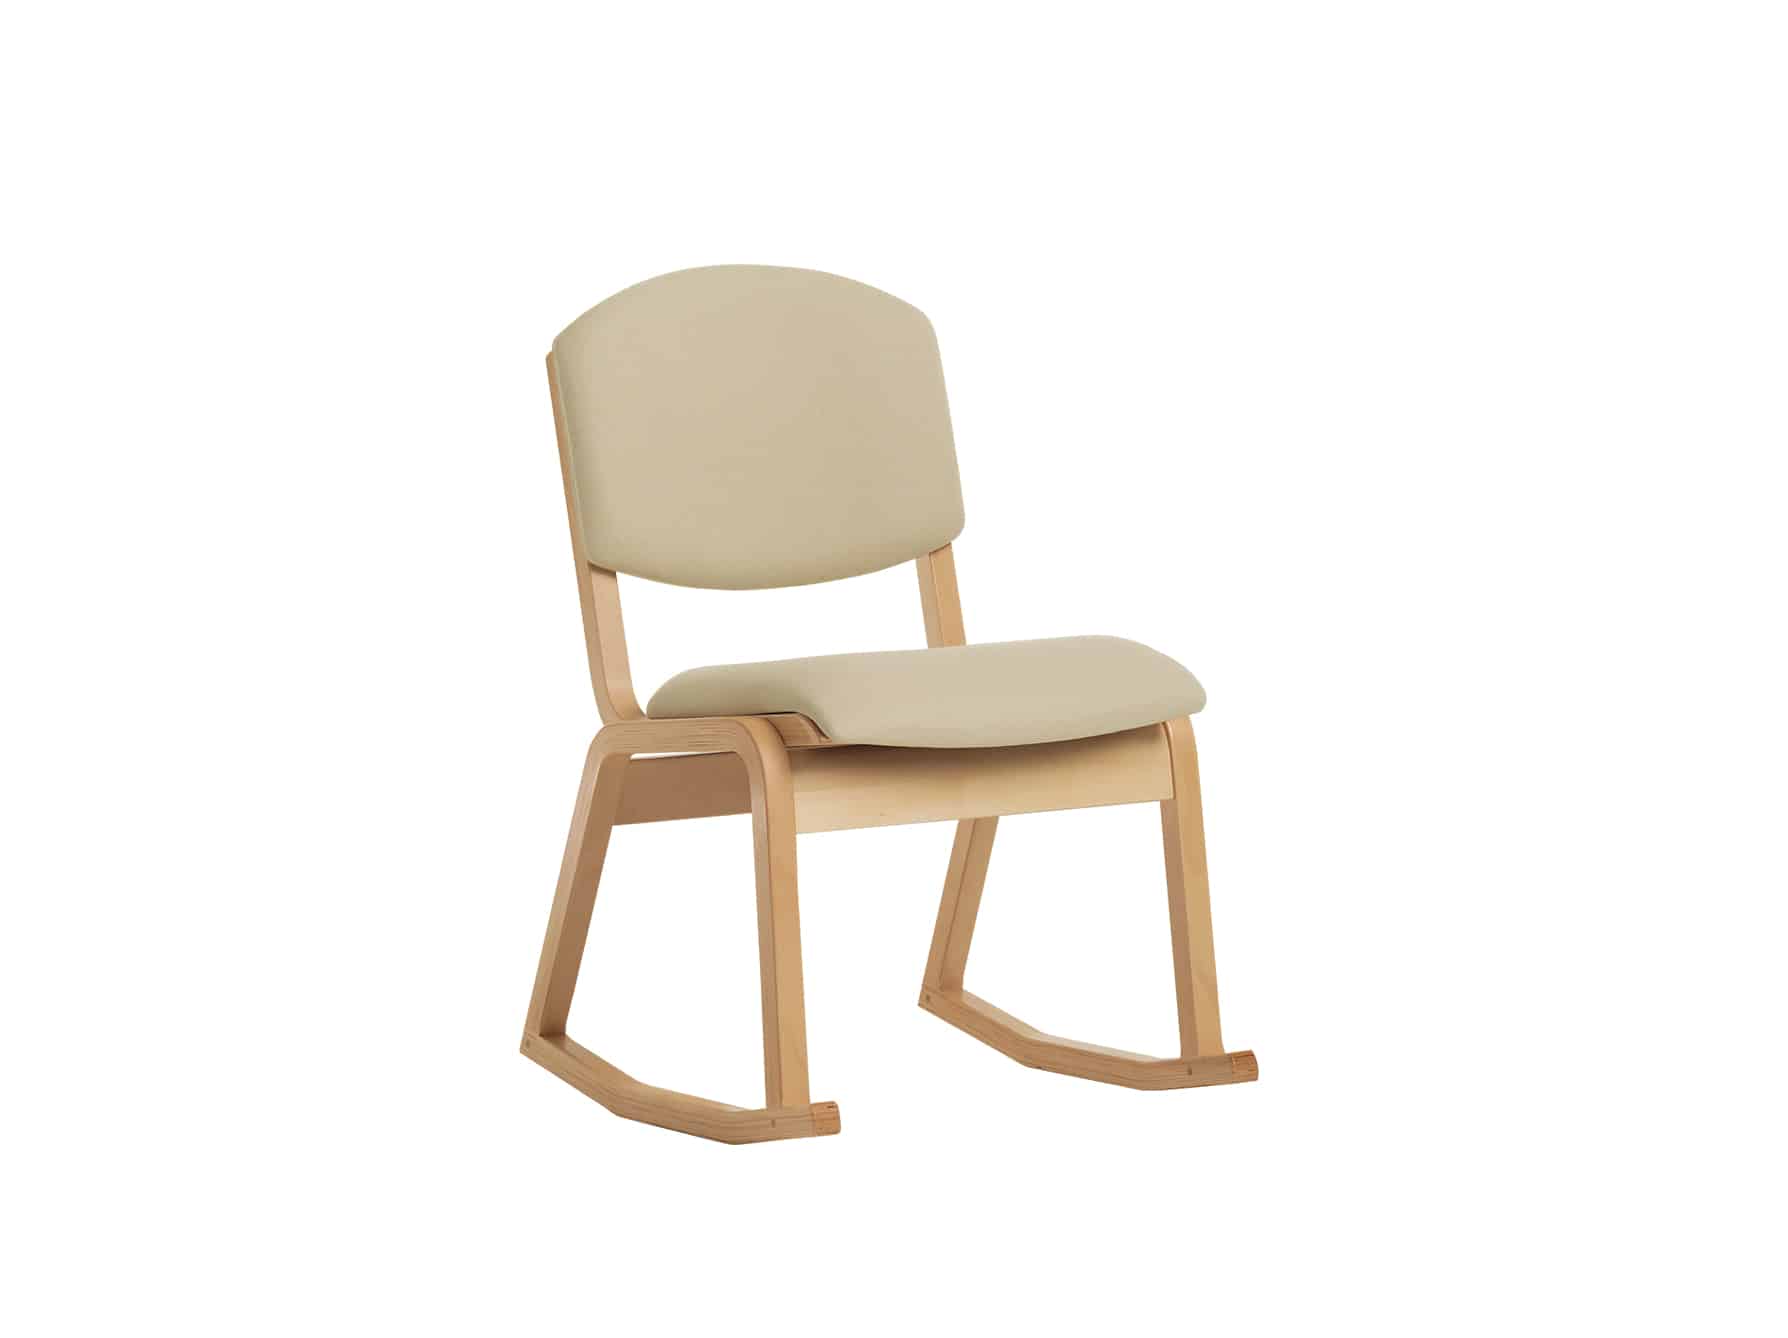 3-Position Student Chair for campus